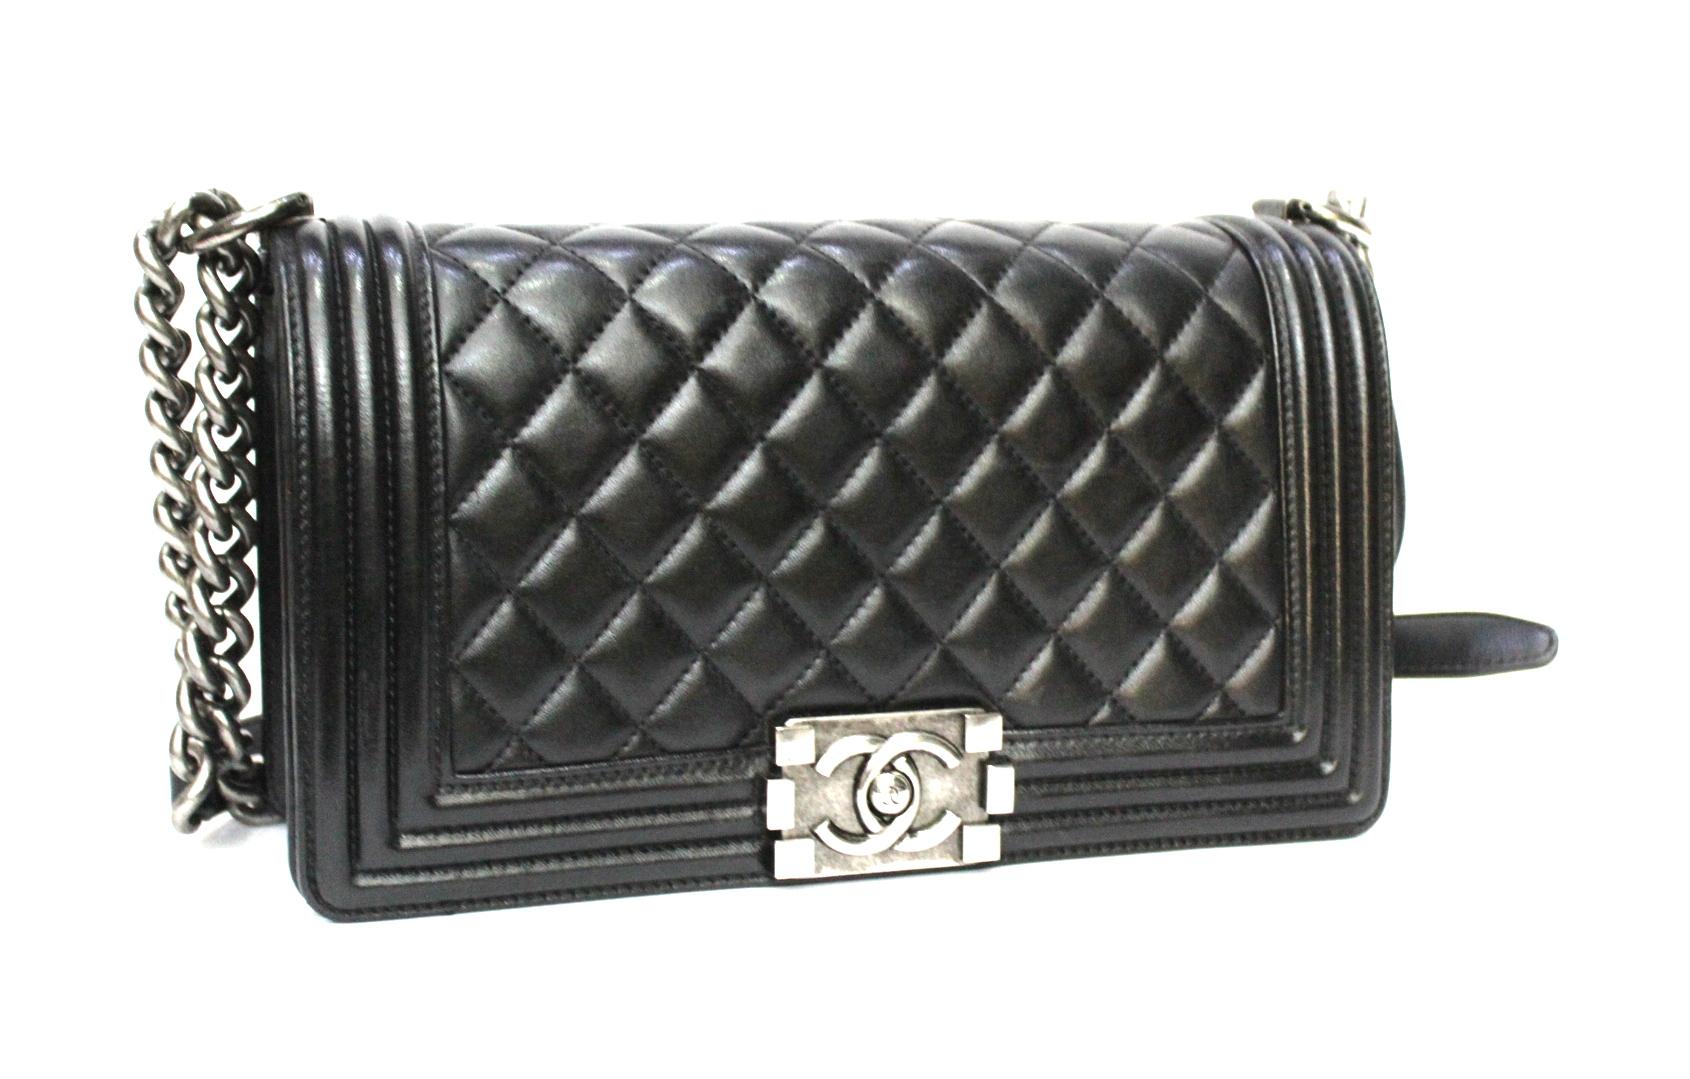 Superb Chanel Boy made of soft black leather with silver hardware.

Closing with classic CC hook, large enough inside.

It is in excellent condition. Year 2013/2014